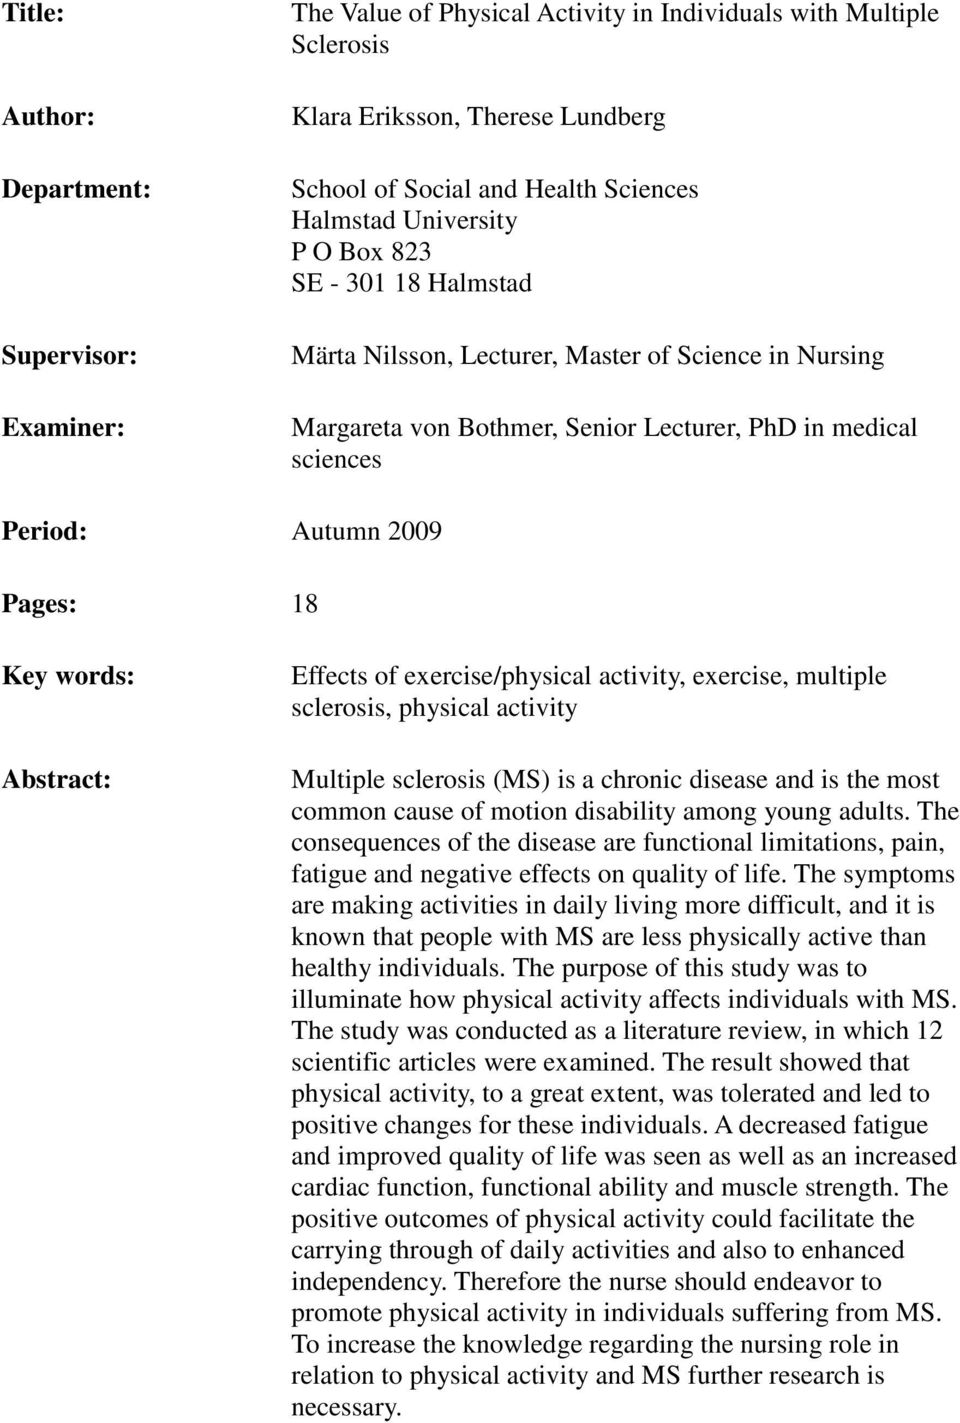 words: Abstract: Effects of exercise/physical activity, exercise, multiple sclerosis, physical activity Multiple sclerosis (MS) is a chronic disease and is the most common cause of motion disability